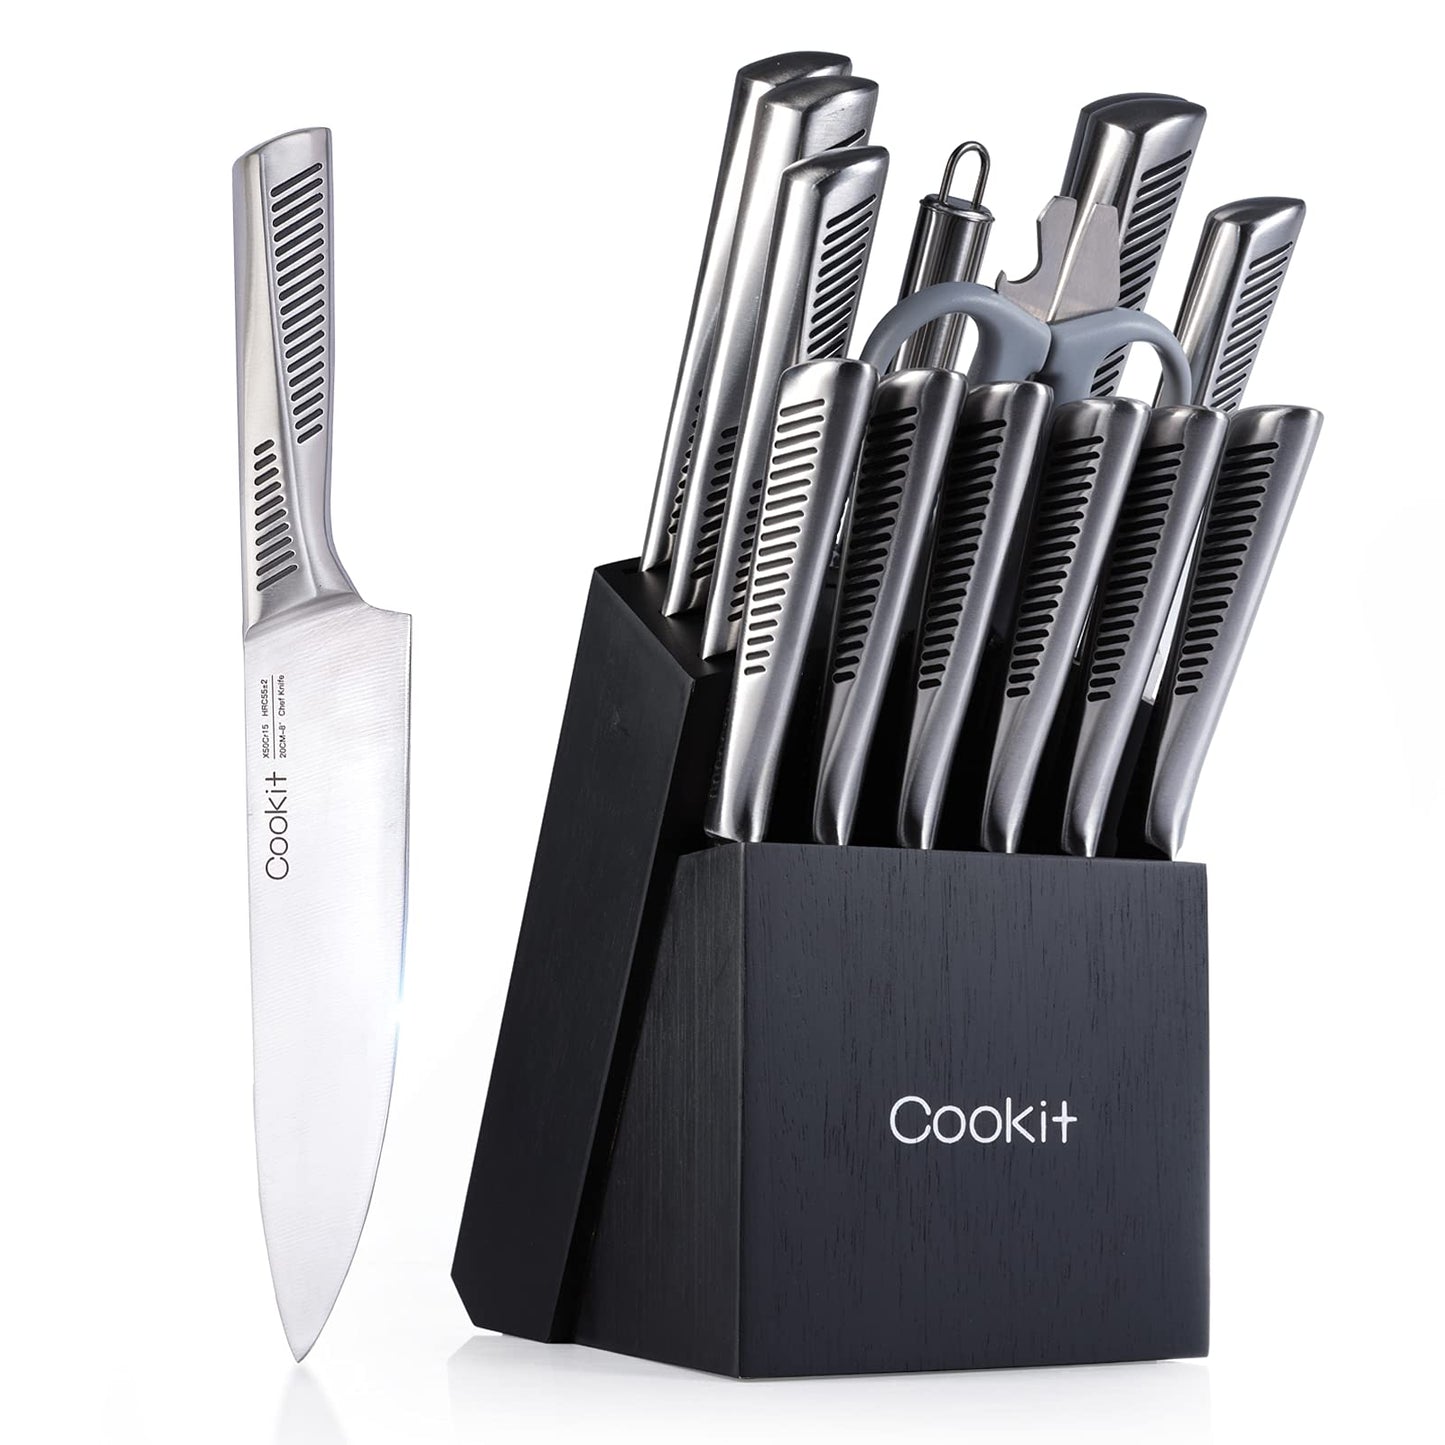 Kitchen Knife Set, 15 Piece Knife Sets with Block, Non-Slip German Stainless Steel with Multifunctional Scissors Knife Sharpener